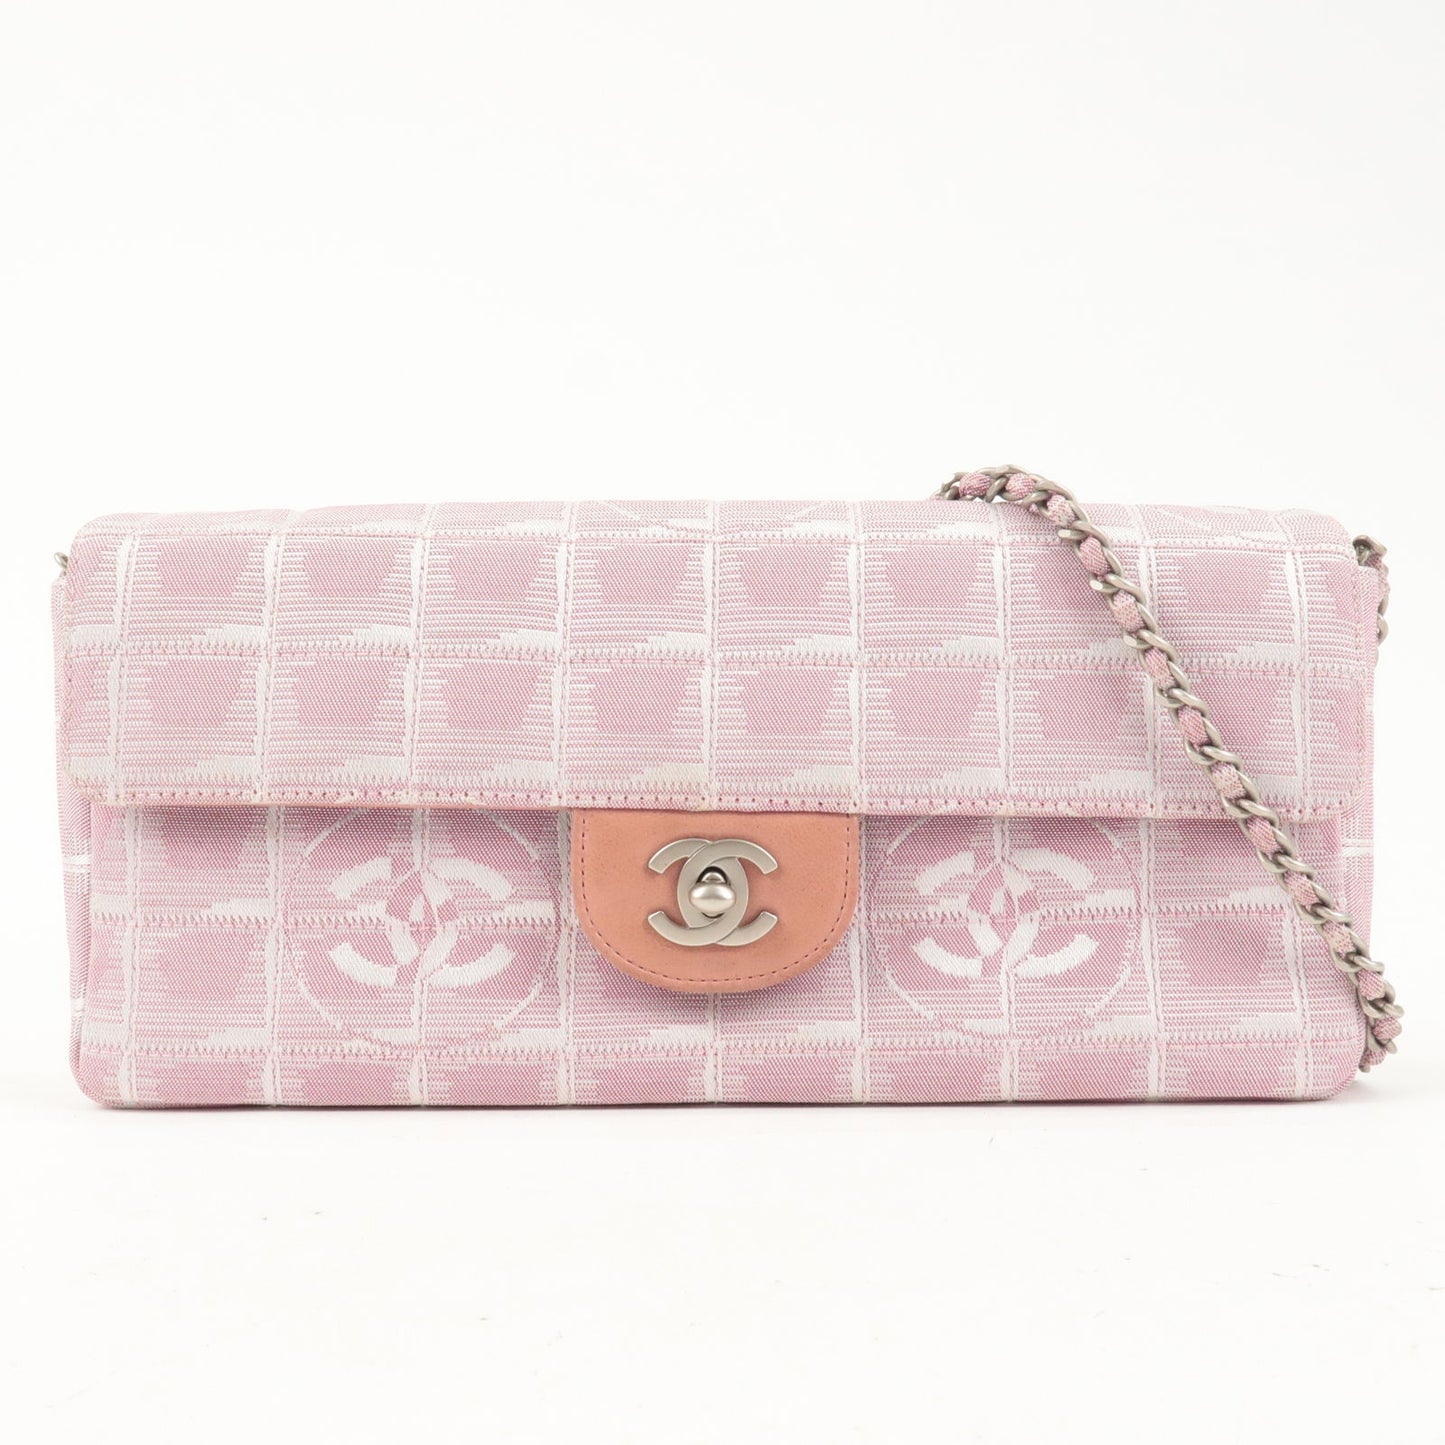 CHANEL Travel Line Nylon Jacquard Leather Chain Bag Pink A15316